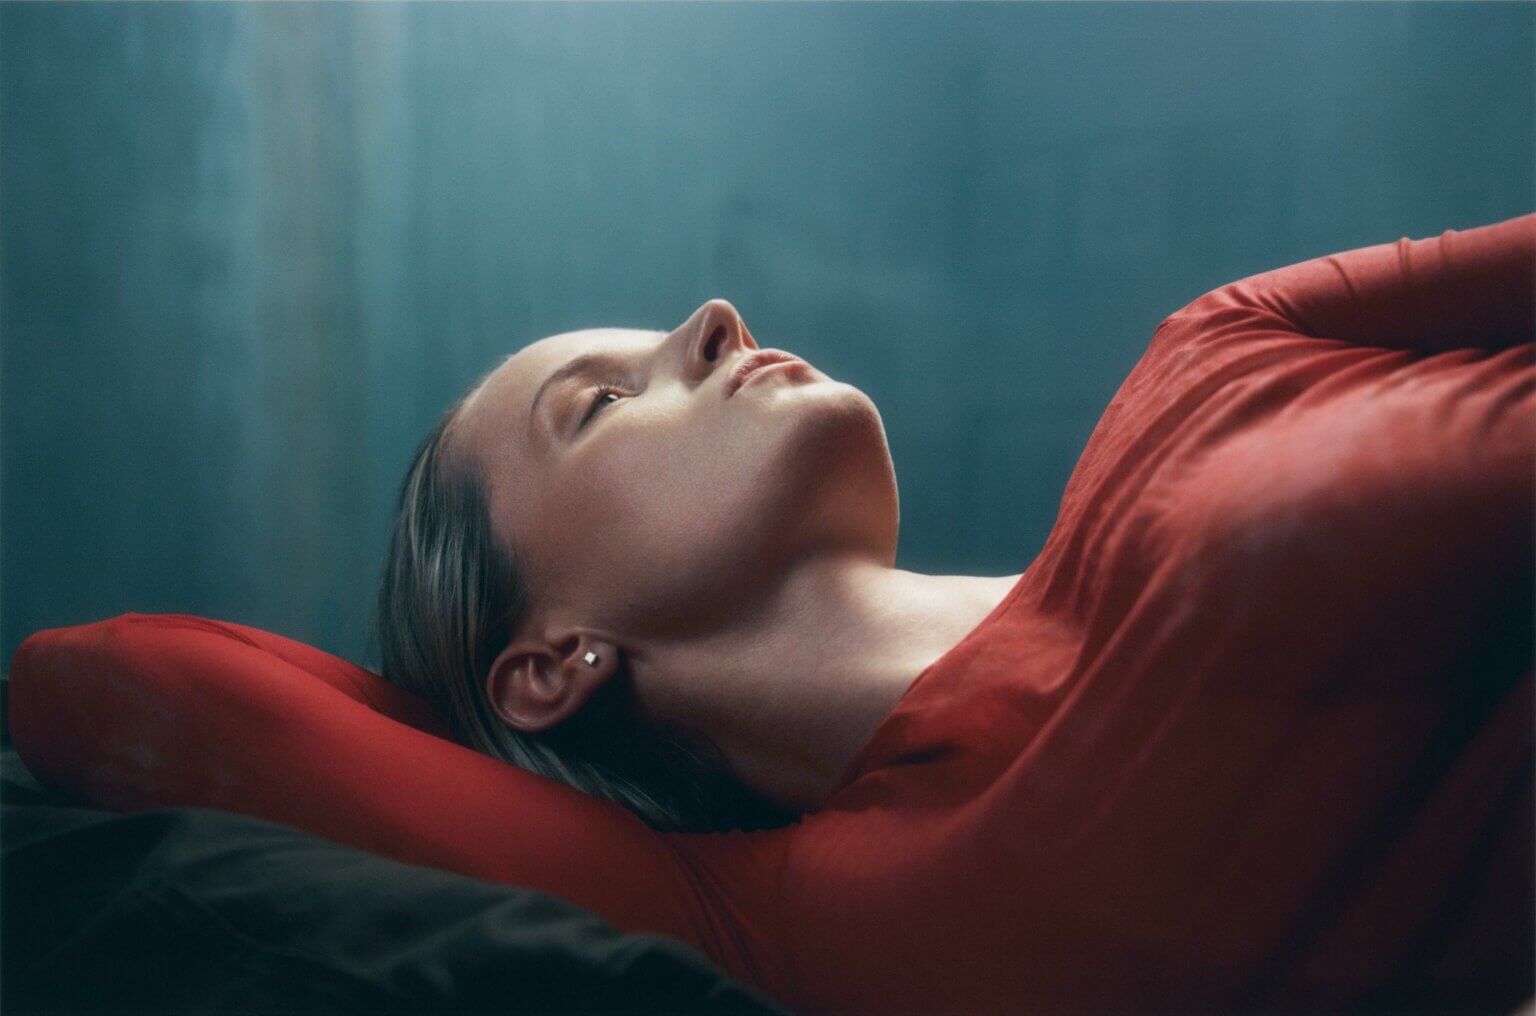 Singer/songwriter, multi-instrumentalist and producer Charlotte Day Wilson has returned with her new single “Forever”, featuring Snoh Aalegra